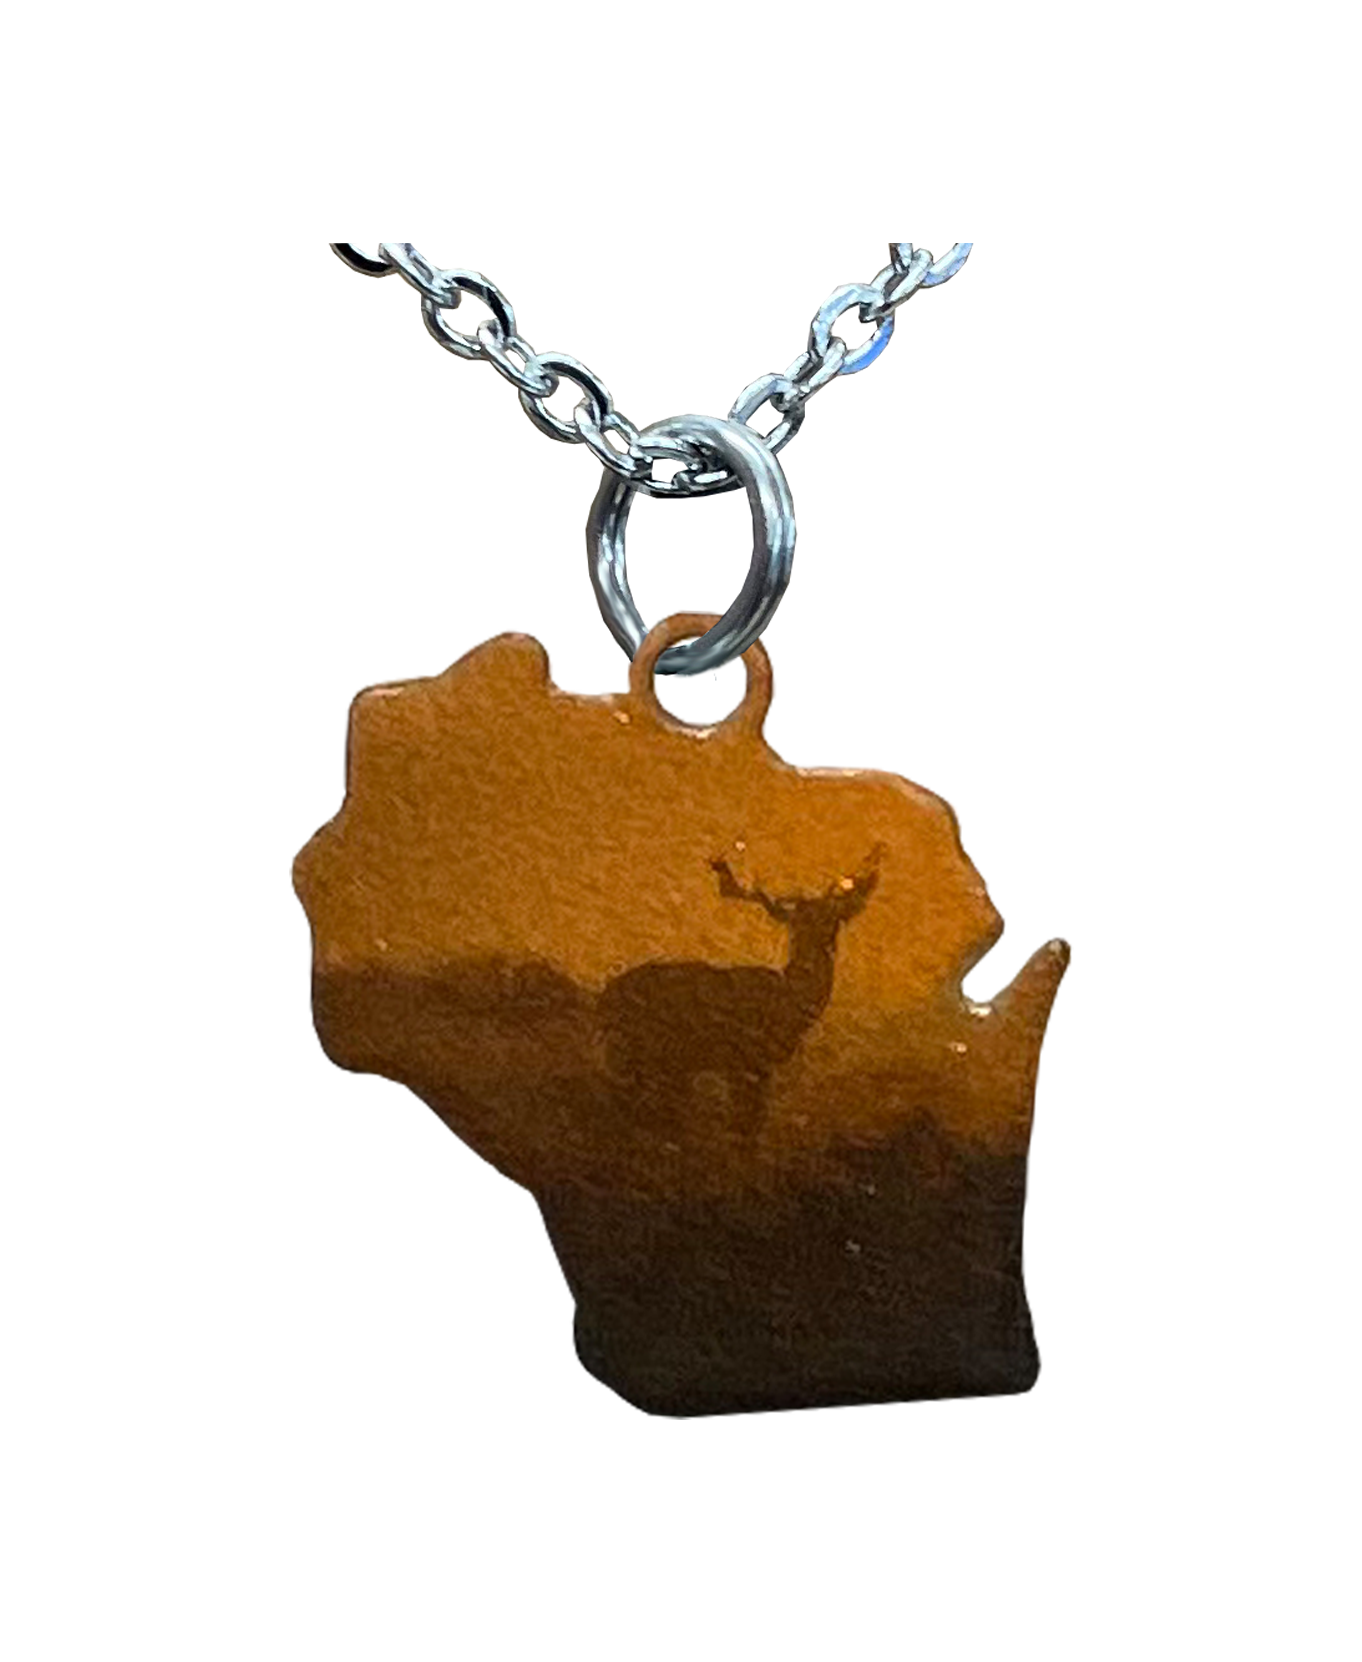 WI, Buck at Dawn, Large Necklace #4463X